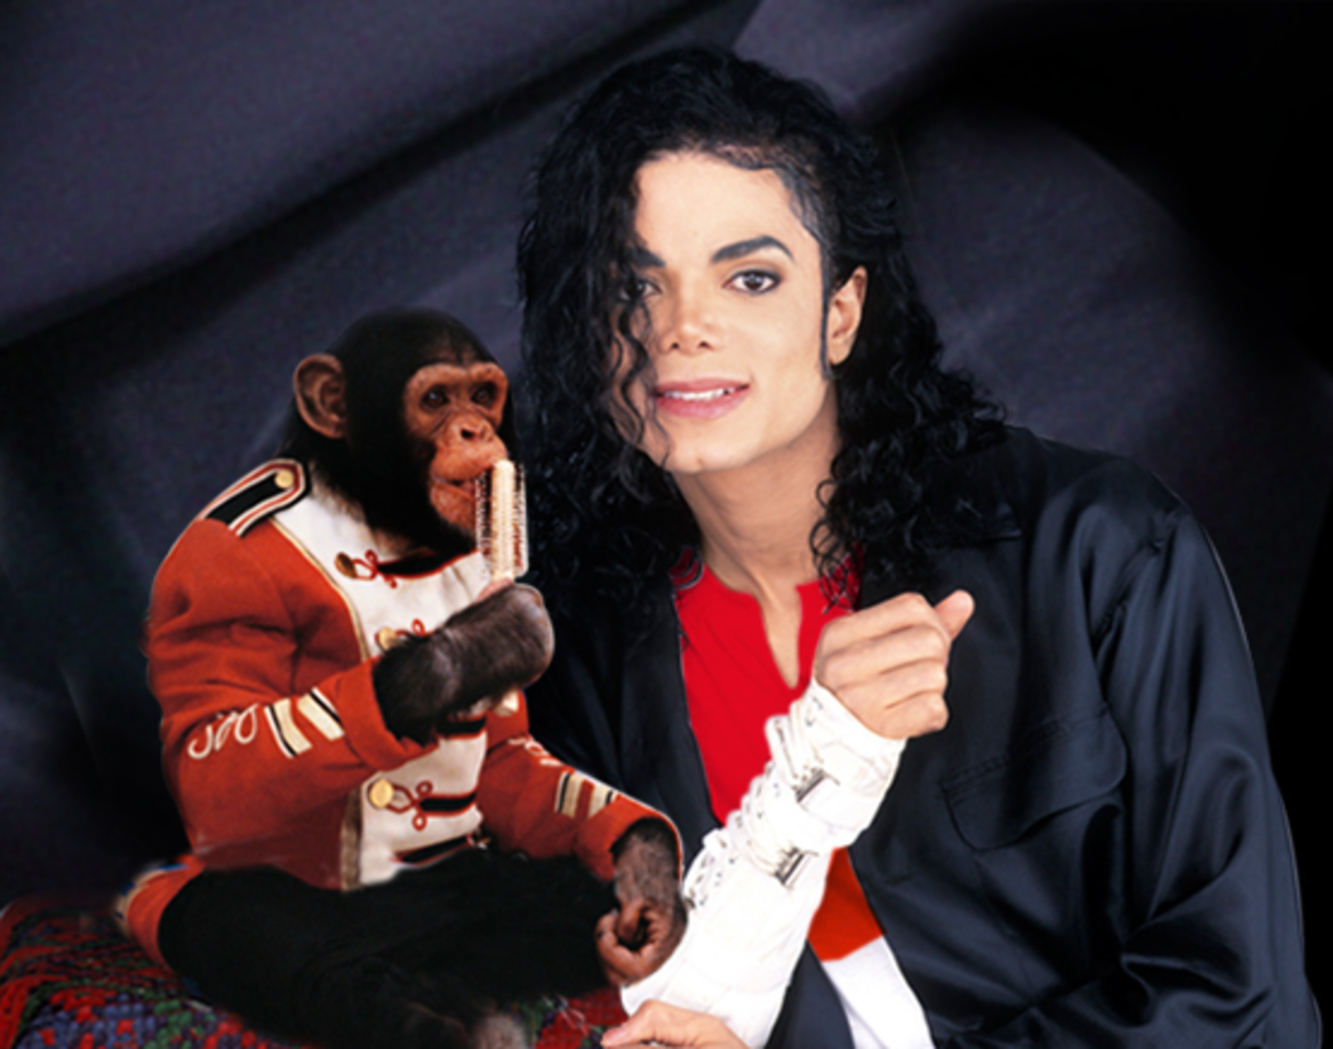 Stop-Motion Animated Movie Based on Michael Jackson-Centric Script in  Development - Rotoscopers